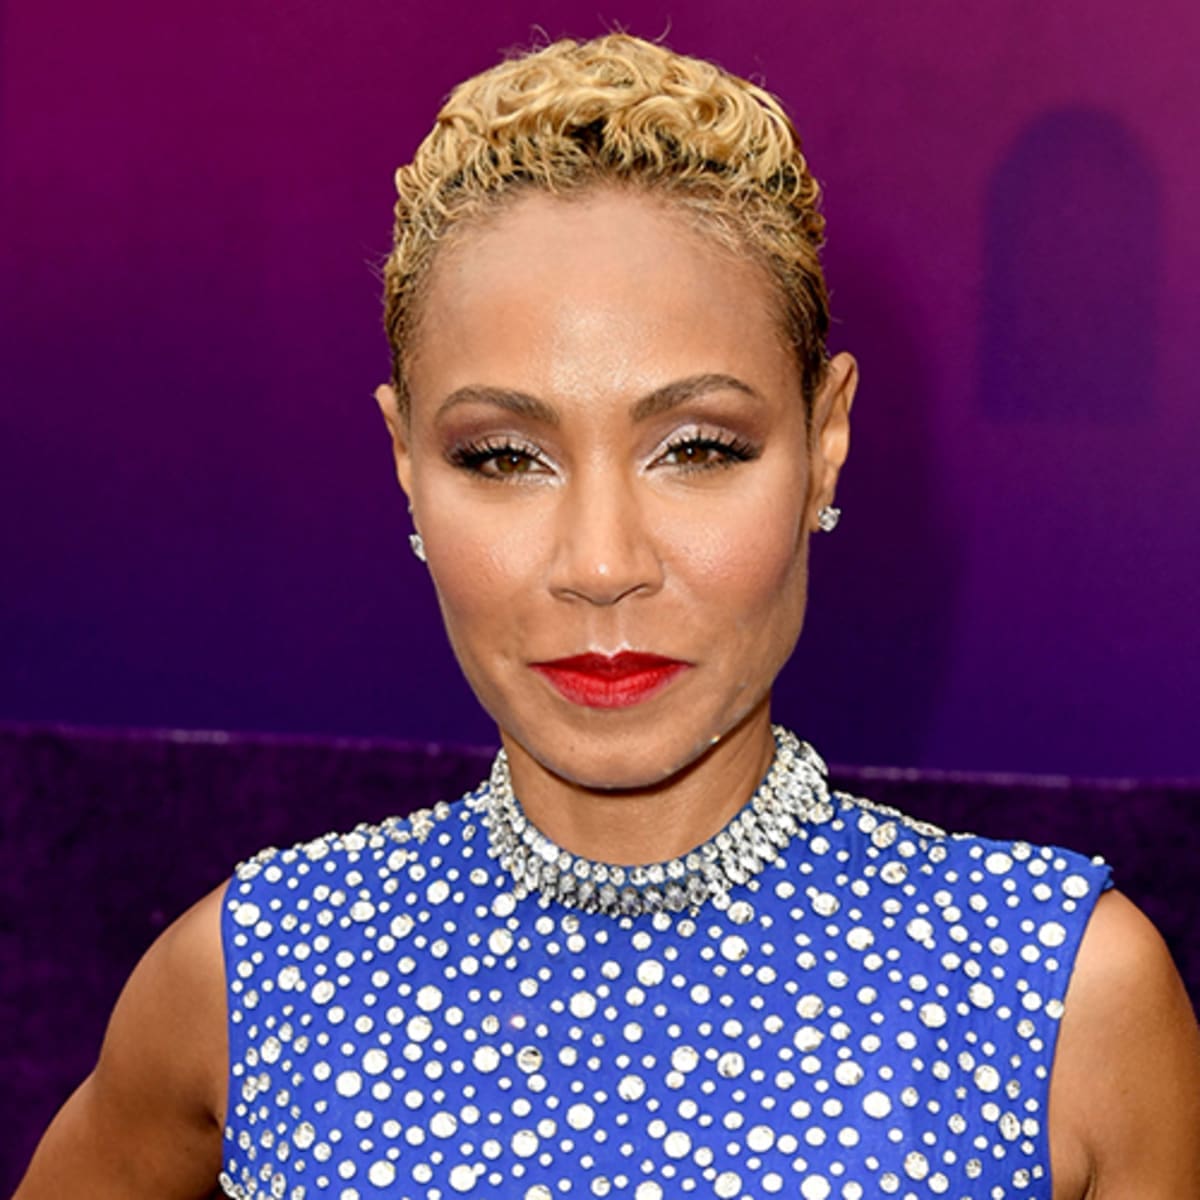 jada-pinkett-smith-releases-statement-about-her-family-following-the-oscars-event